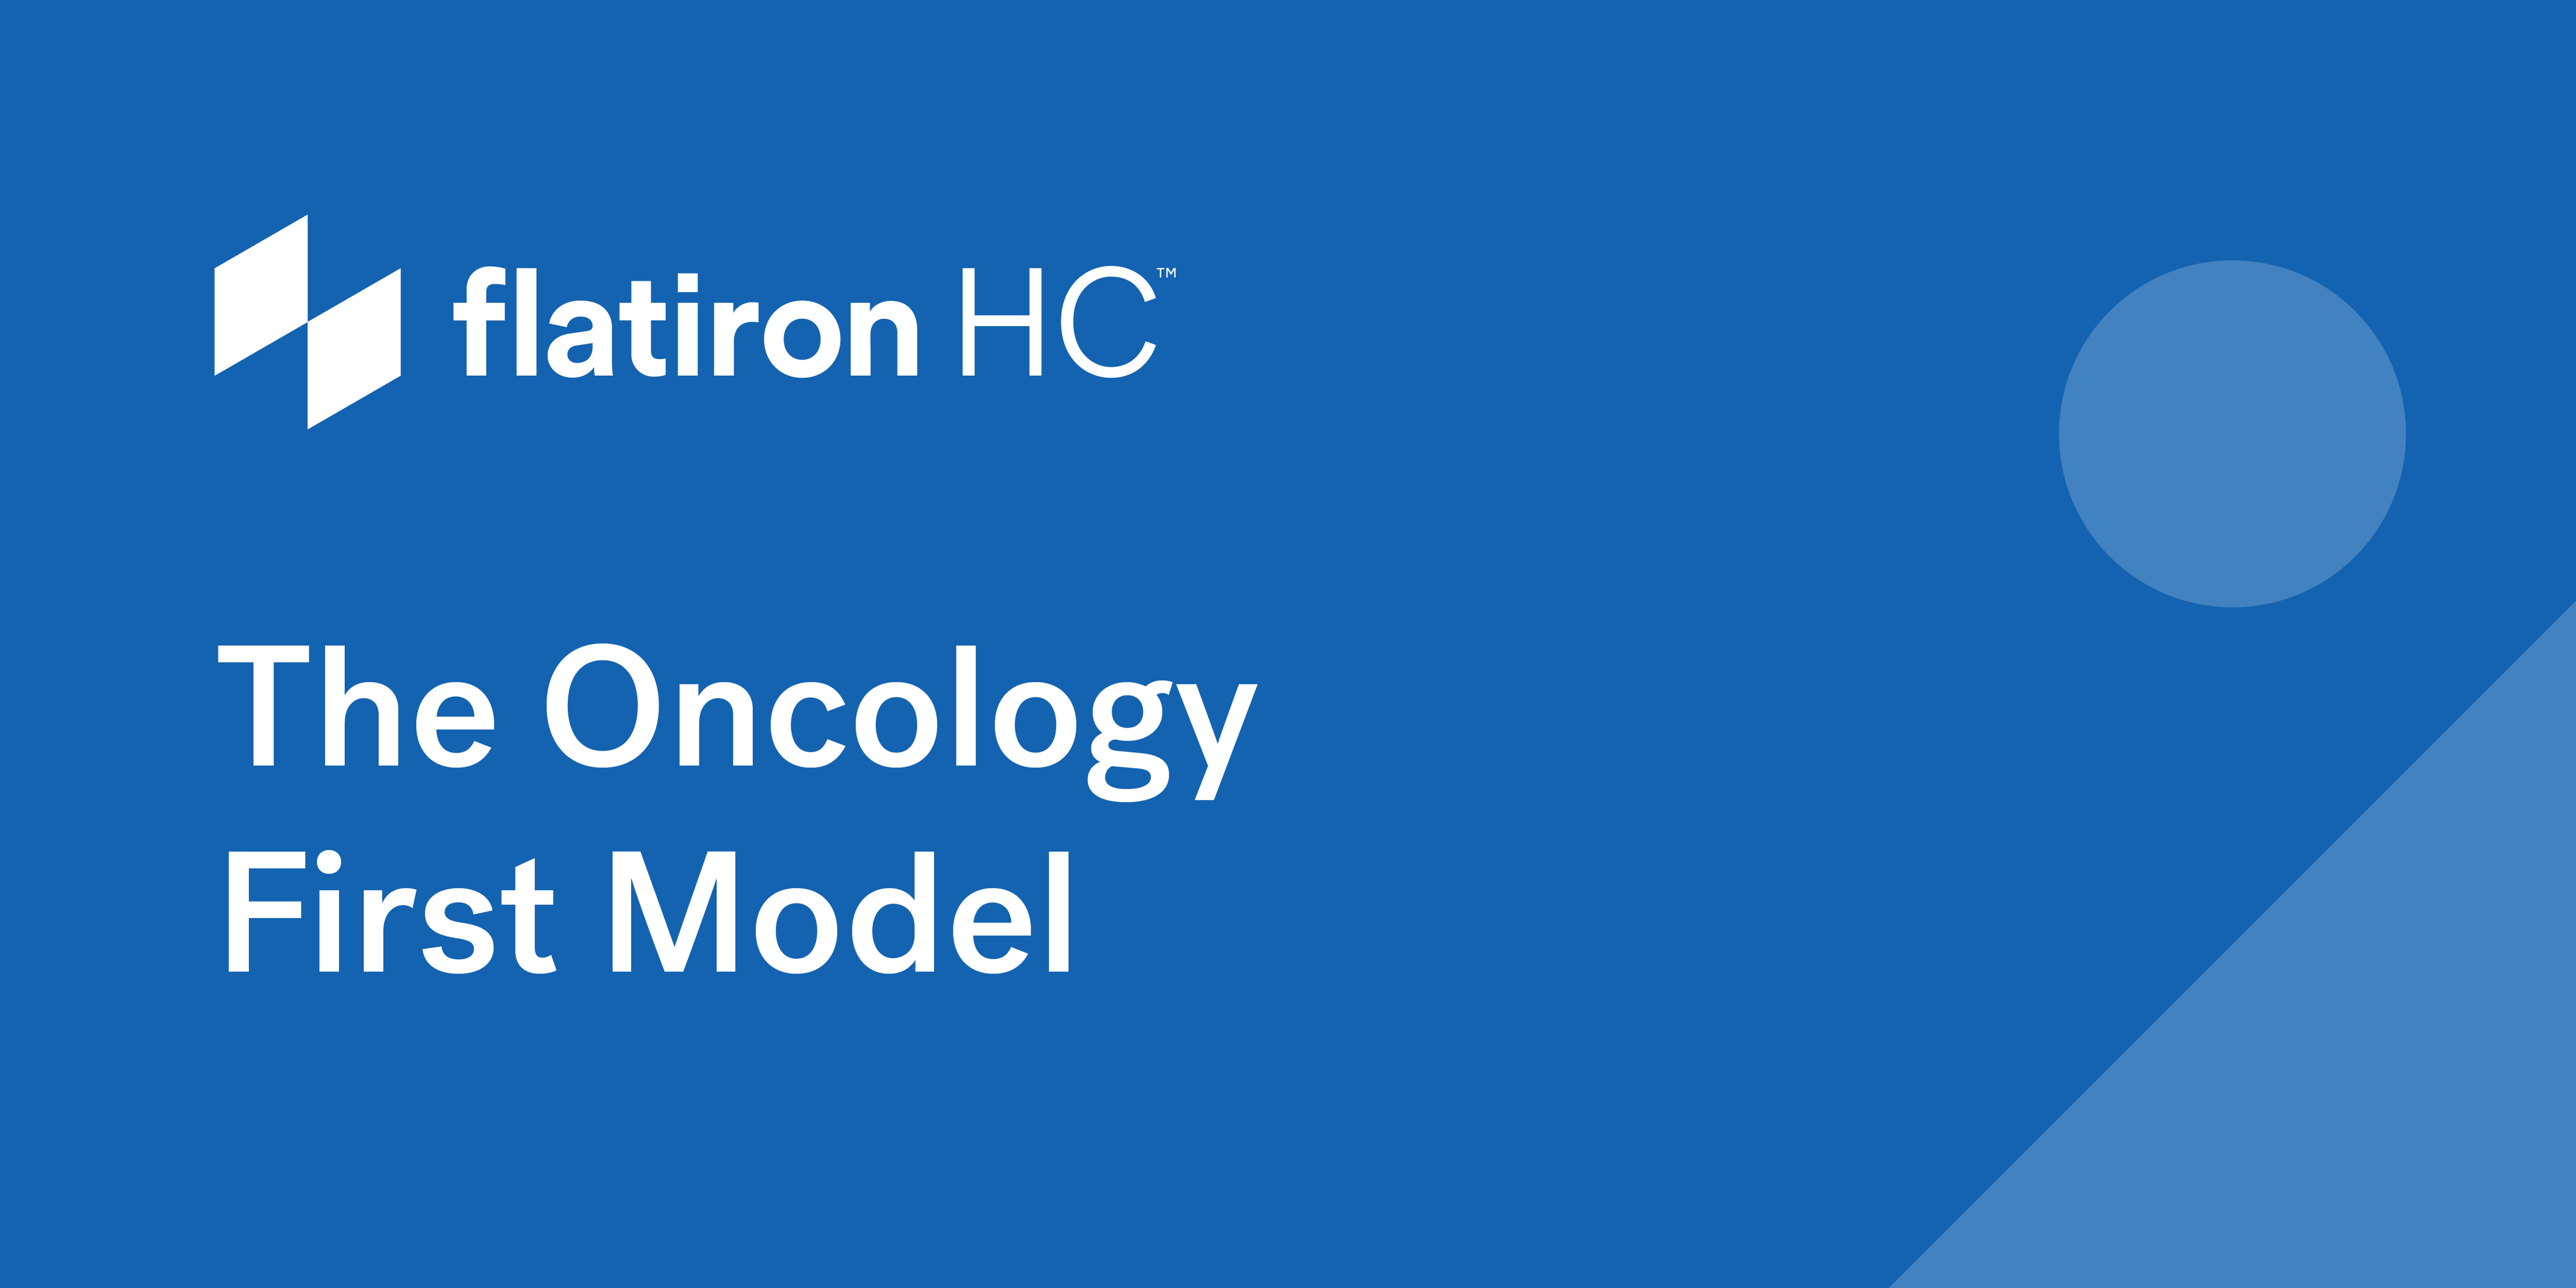 flatironhc-the-oncology-first-model (1)